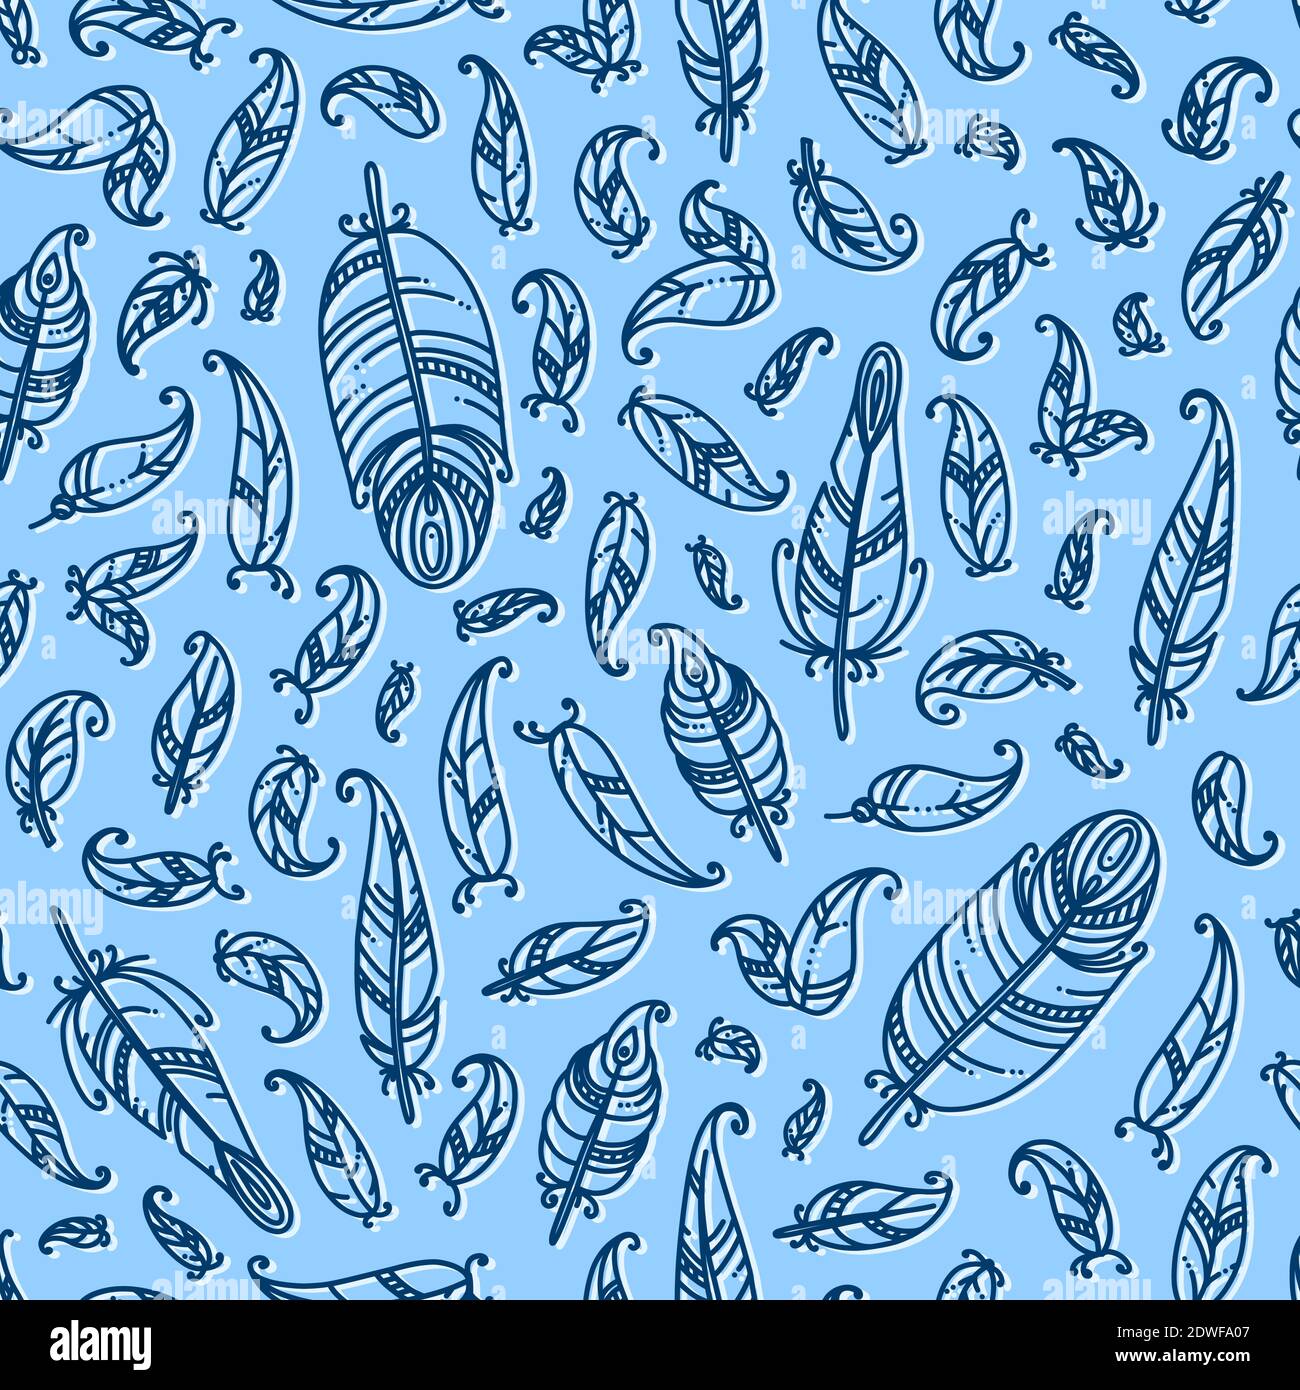 Feathers in seamless pattern. Doodle style feathers in blue background ...